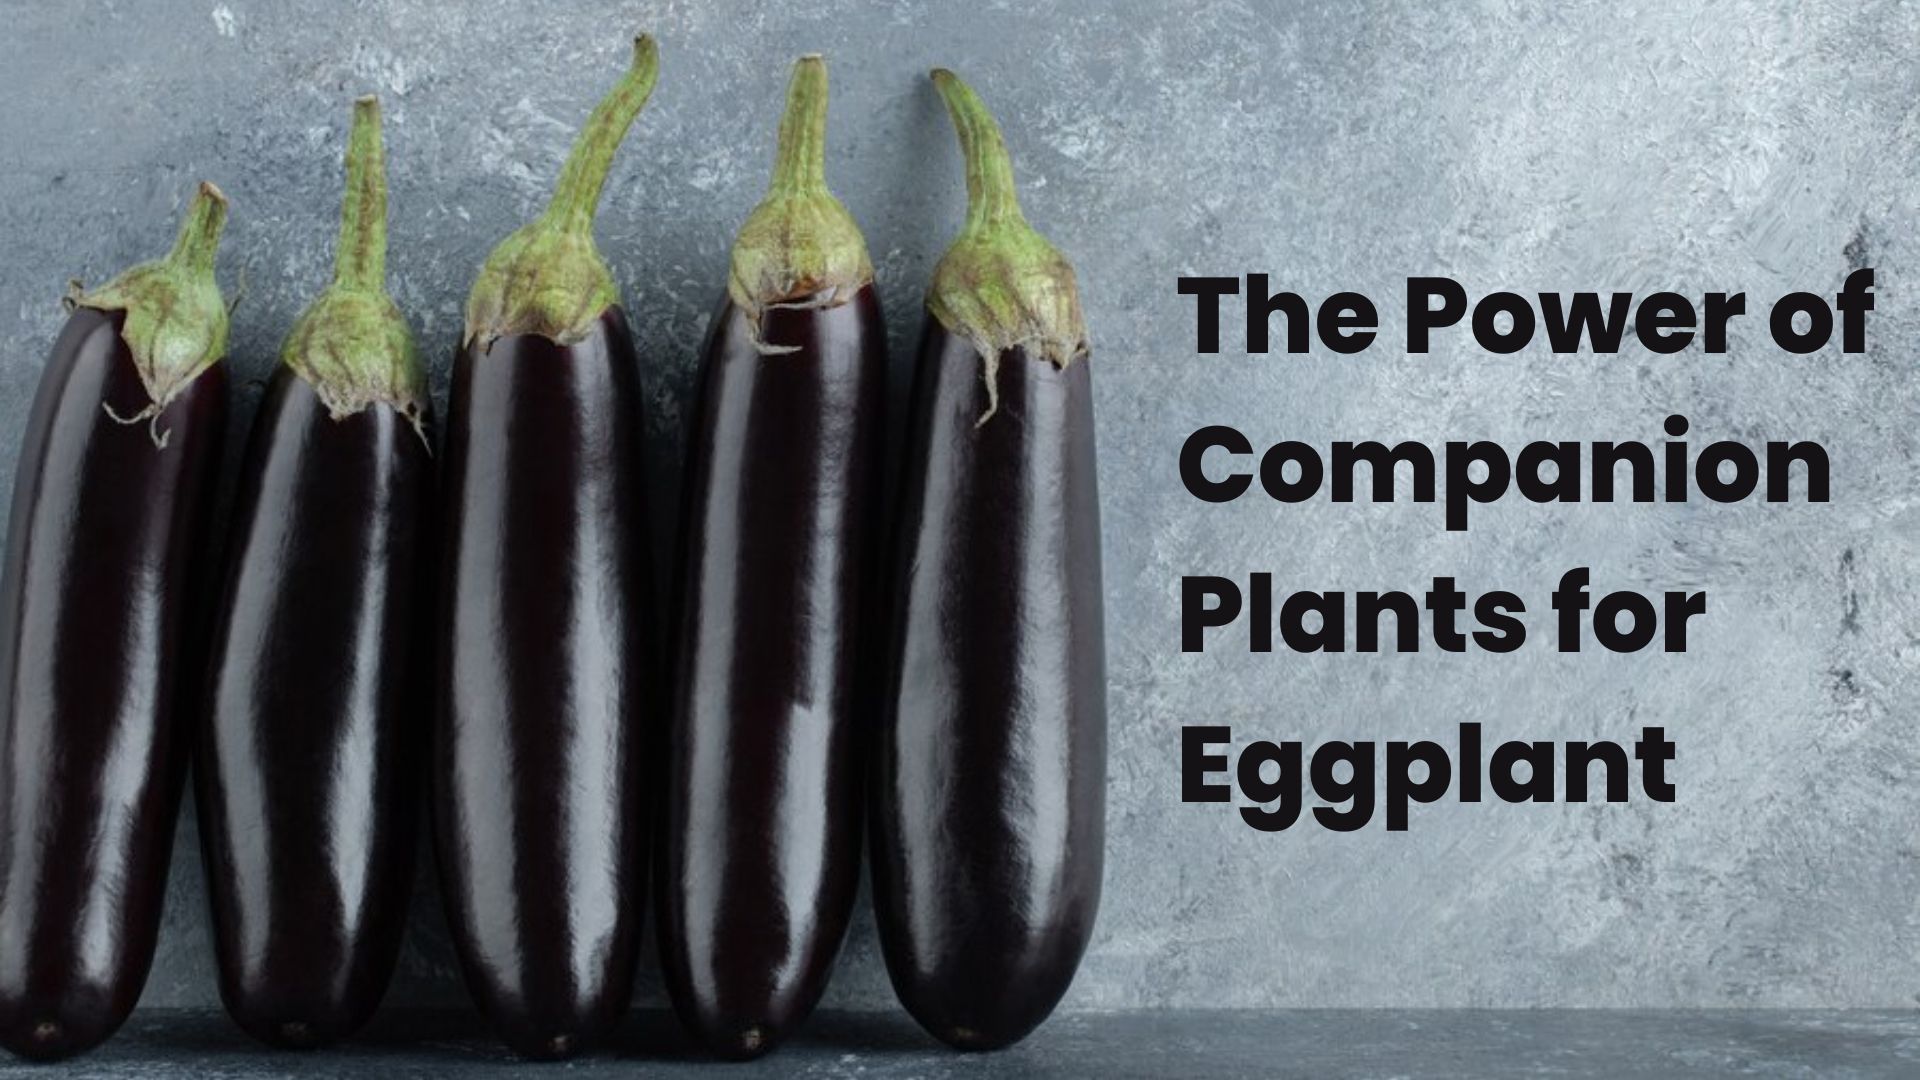 The Power of Companion Plants for Eggplant